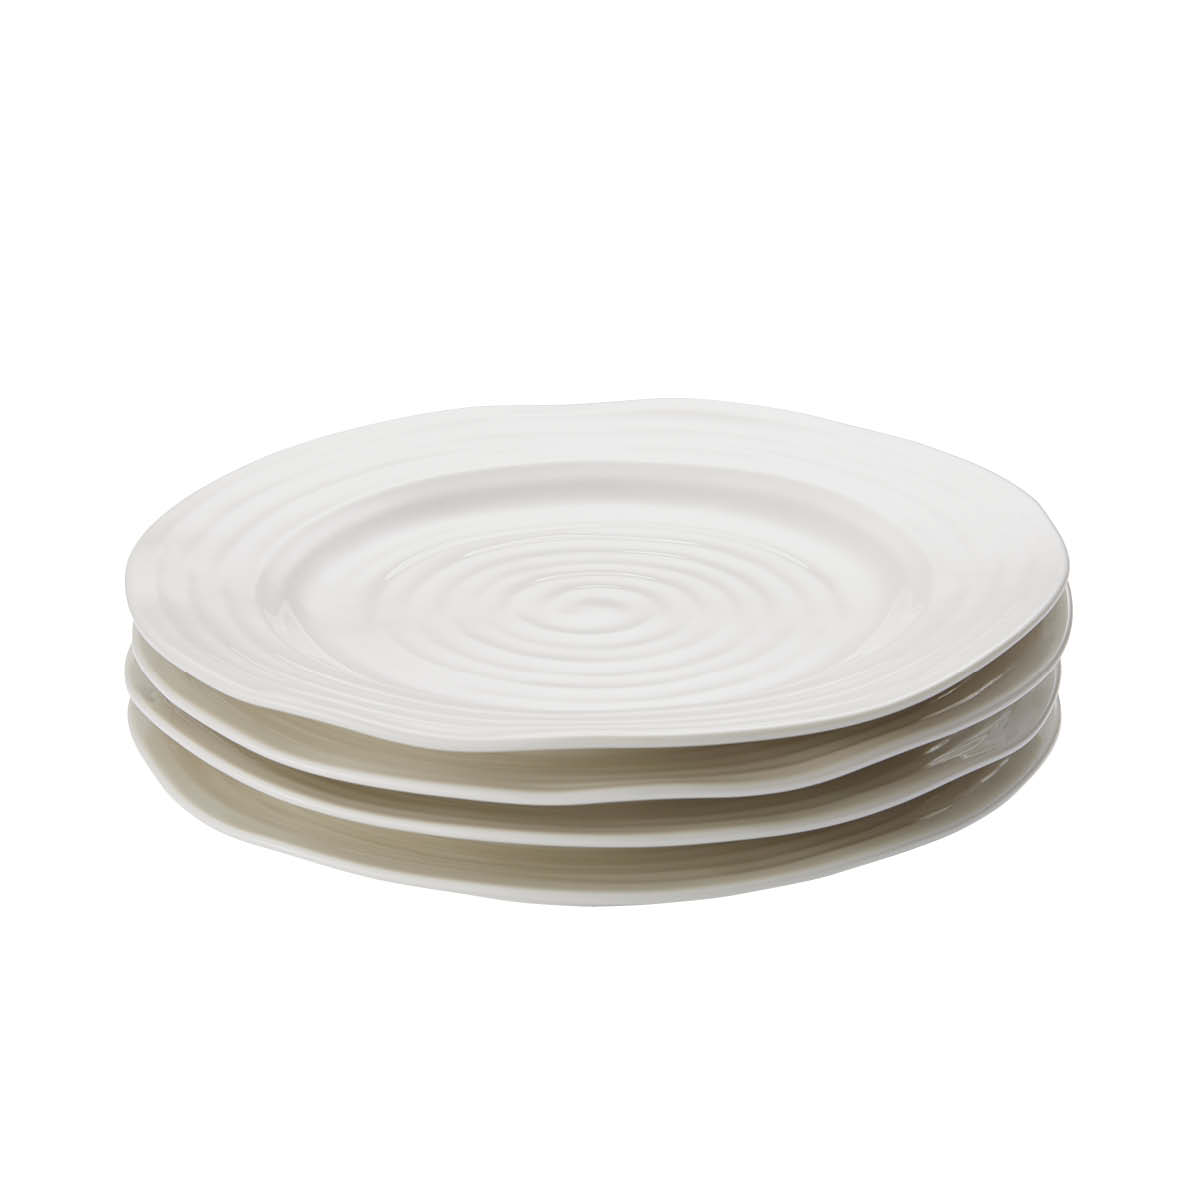 Portmeirion Sophie Conran White Set of 4 Salad Plates image number null